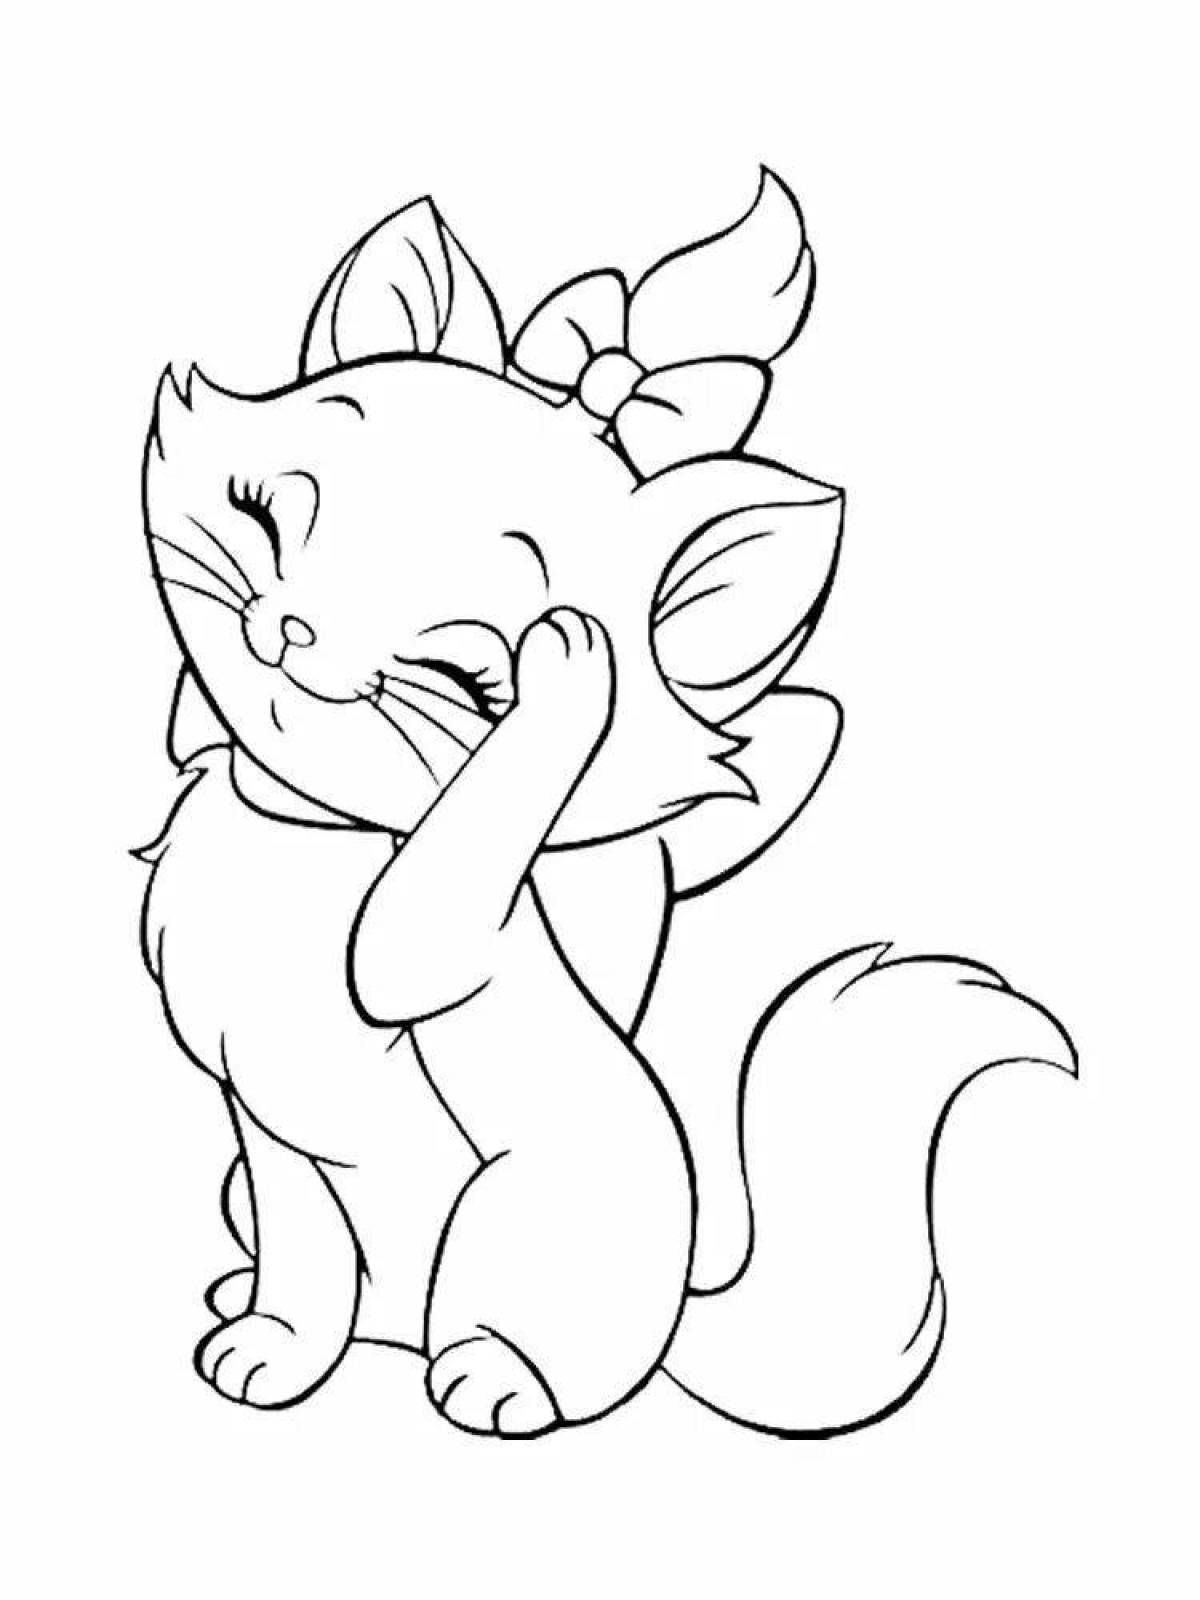 Cute marie kitty coloring page